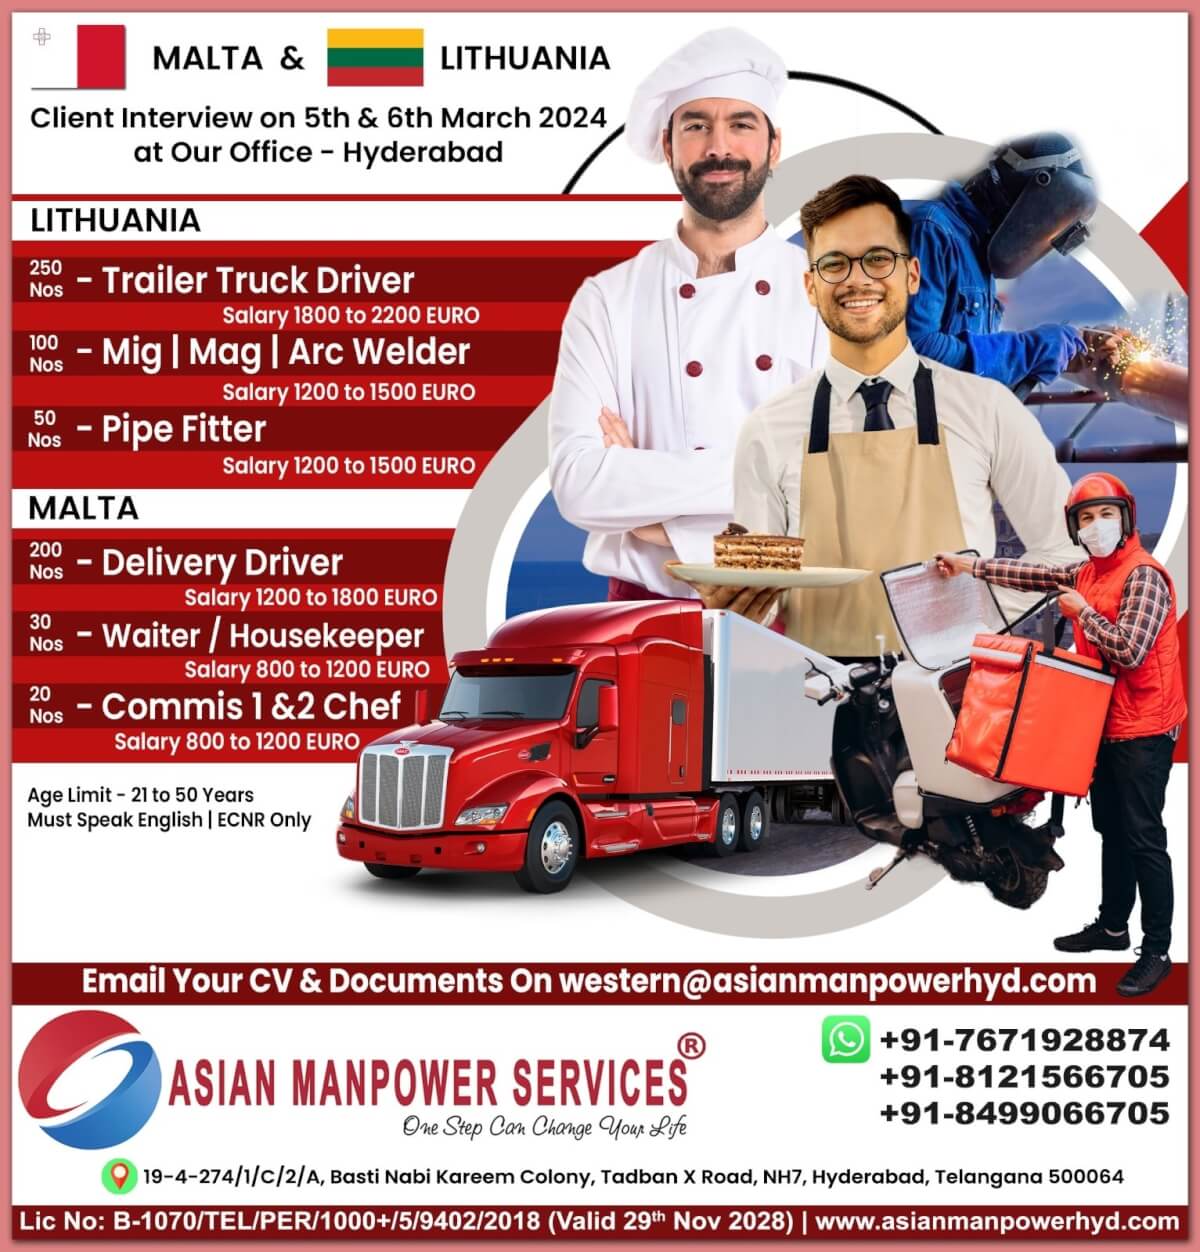 Client Interview for Malta and Lithuania Work Visa in Hyderabad - on 05 & 06-03-2024